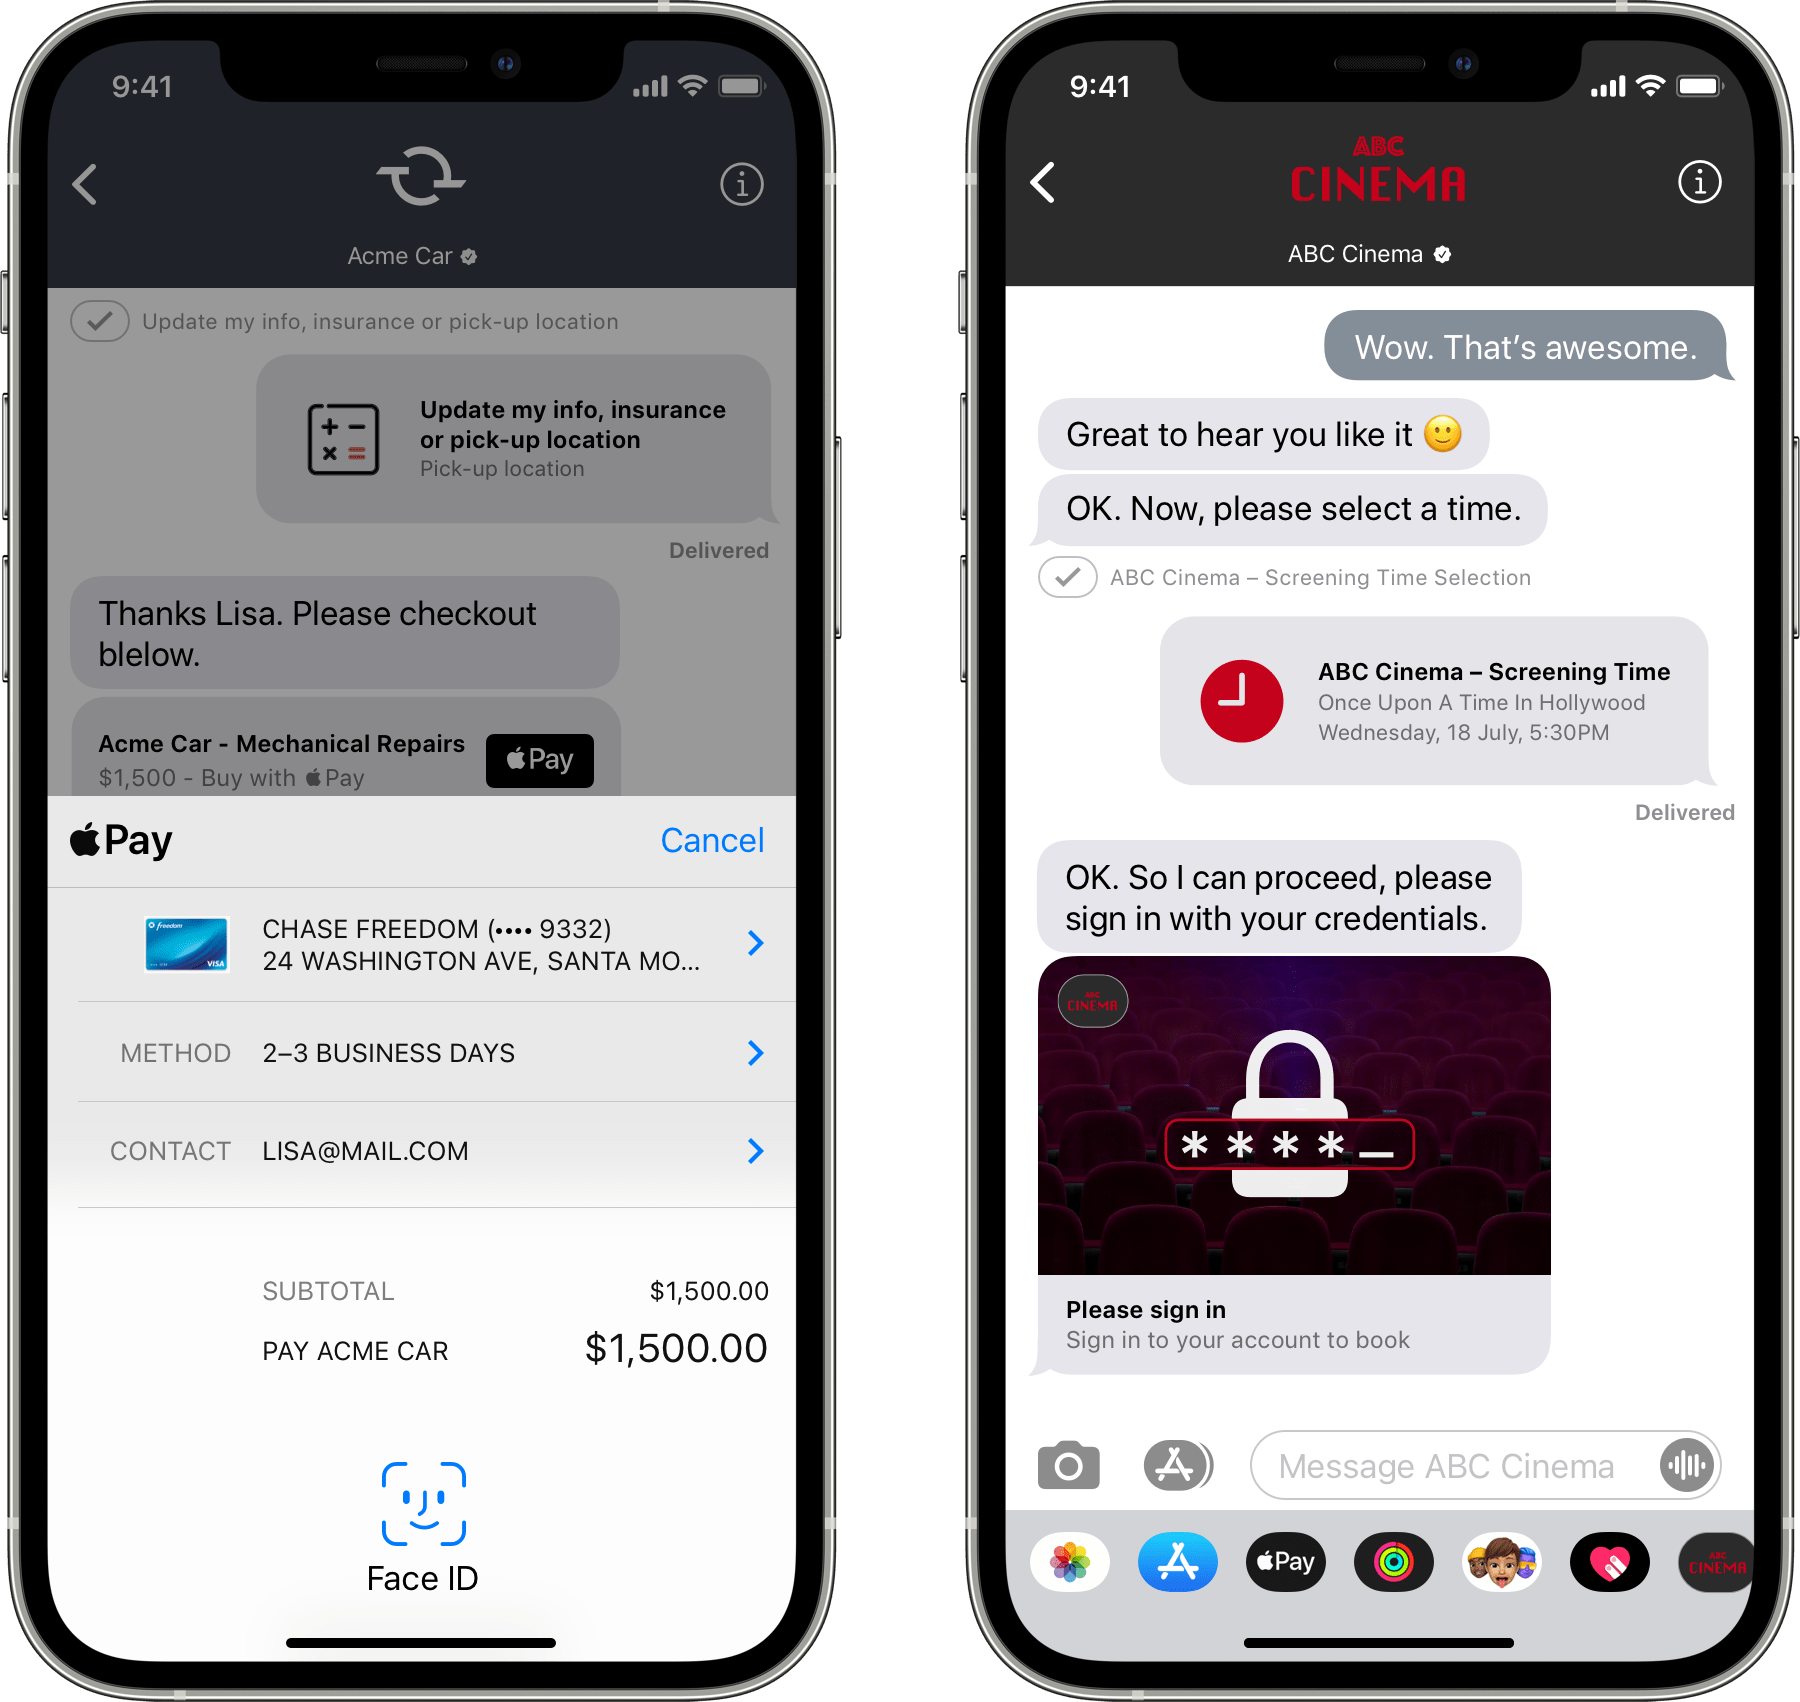 Apple Pay (left) and authentication (right)